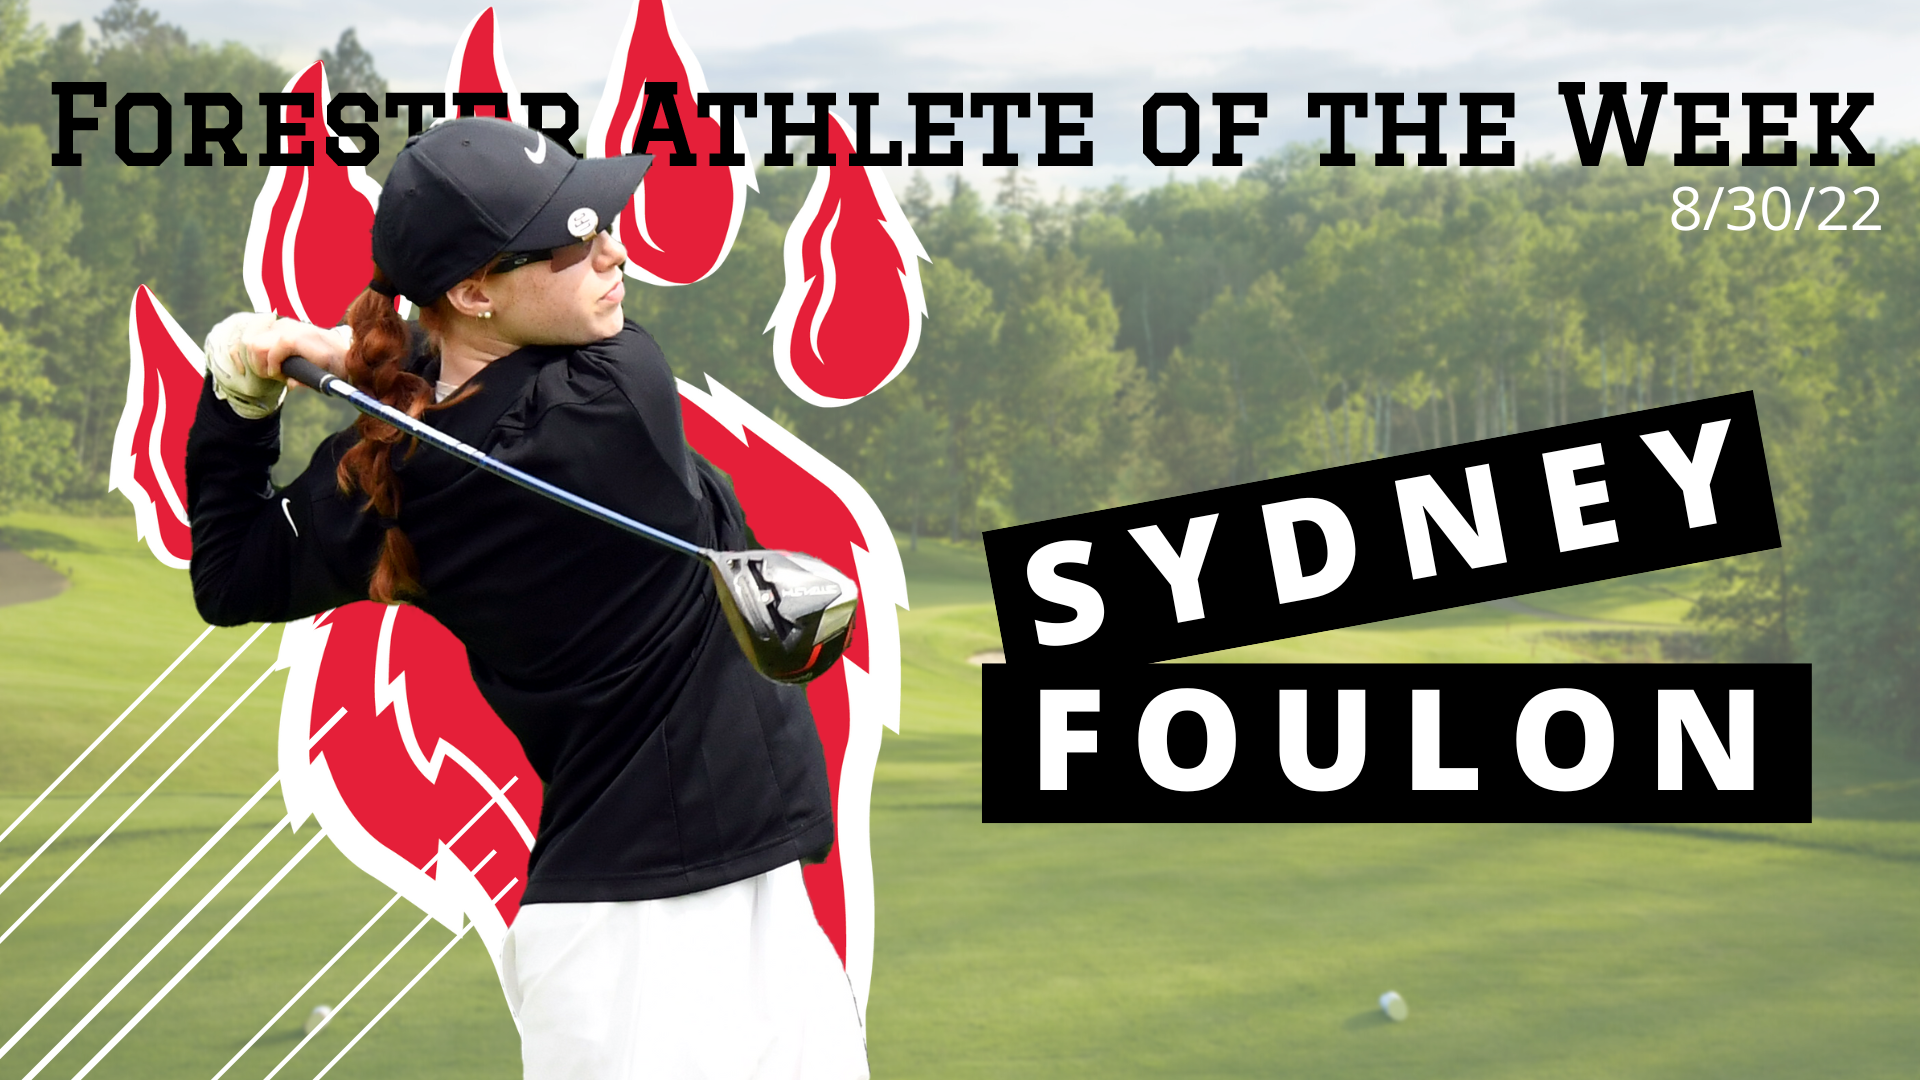 Sydney Foulon Named Forester Athlete of the Week